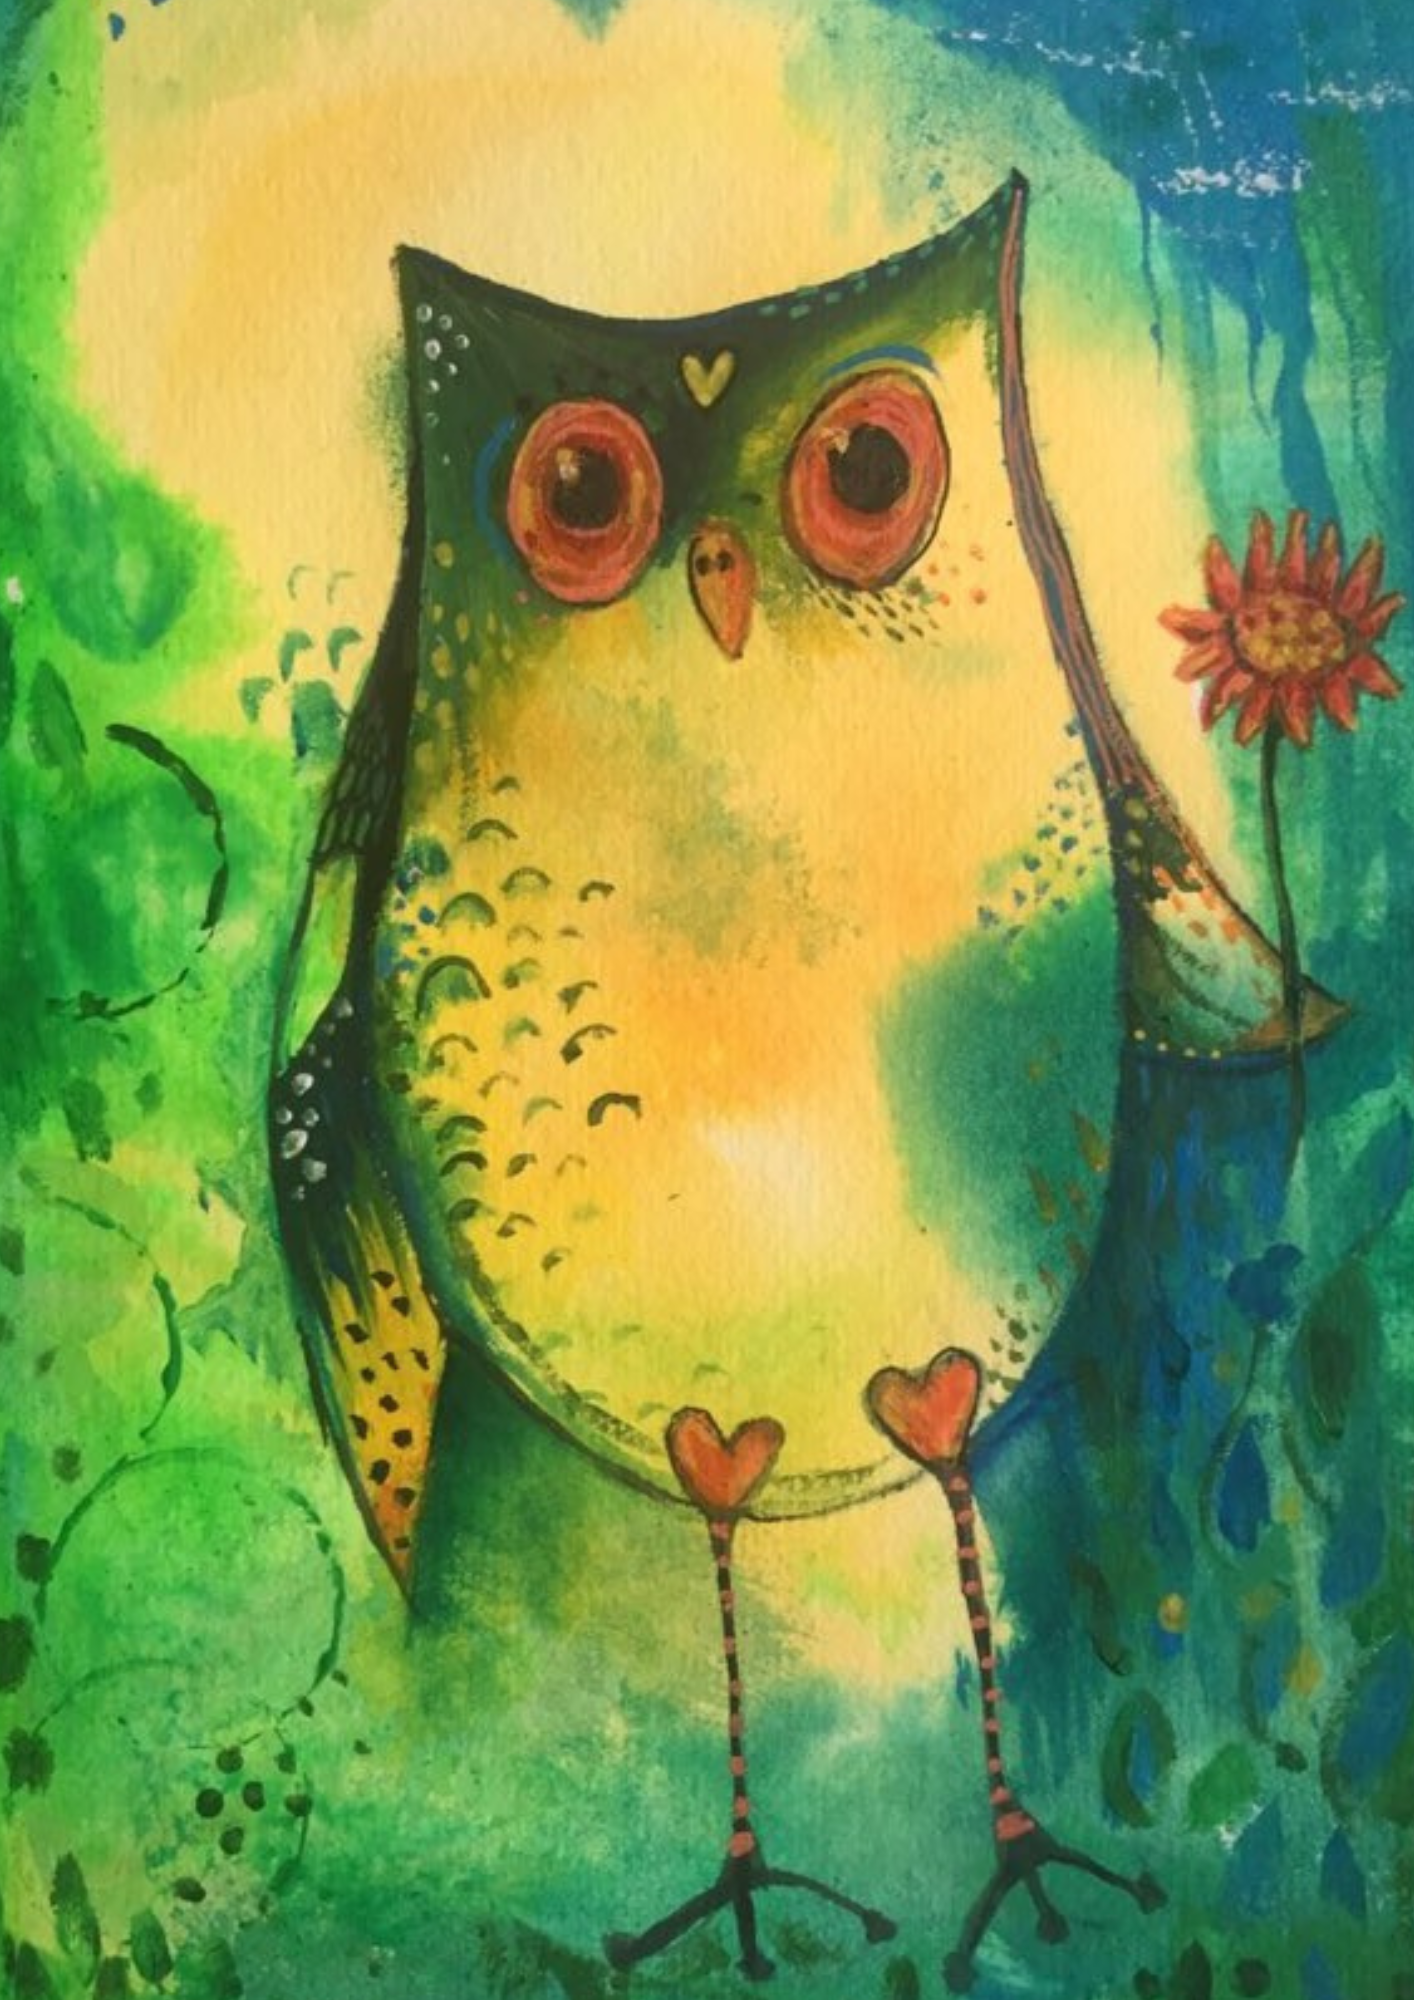 whimsical owl art - yellows and green and black owl holding an orange flower on a n abstract yellow, blue and green background. She has stripy black and orange legs and orange eyes with orange beak. Heart hips at the top of her legs.